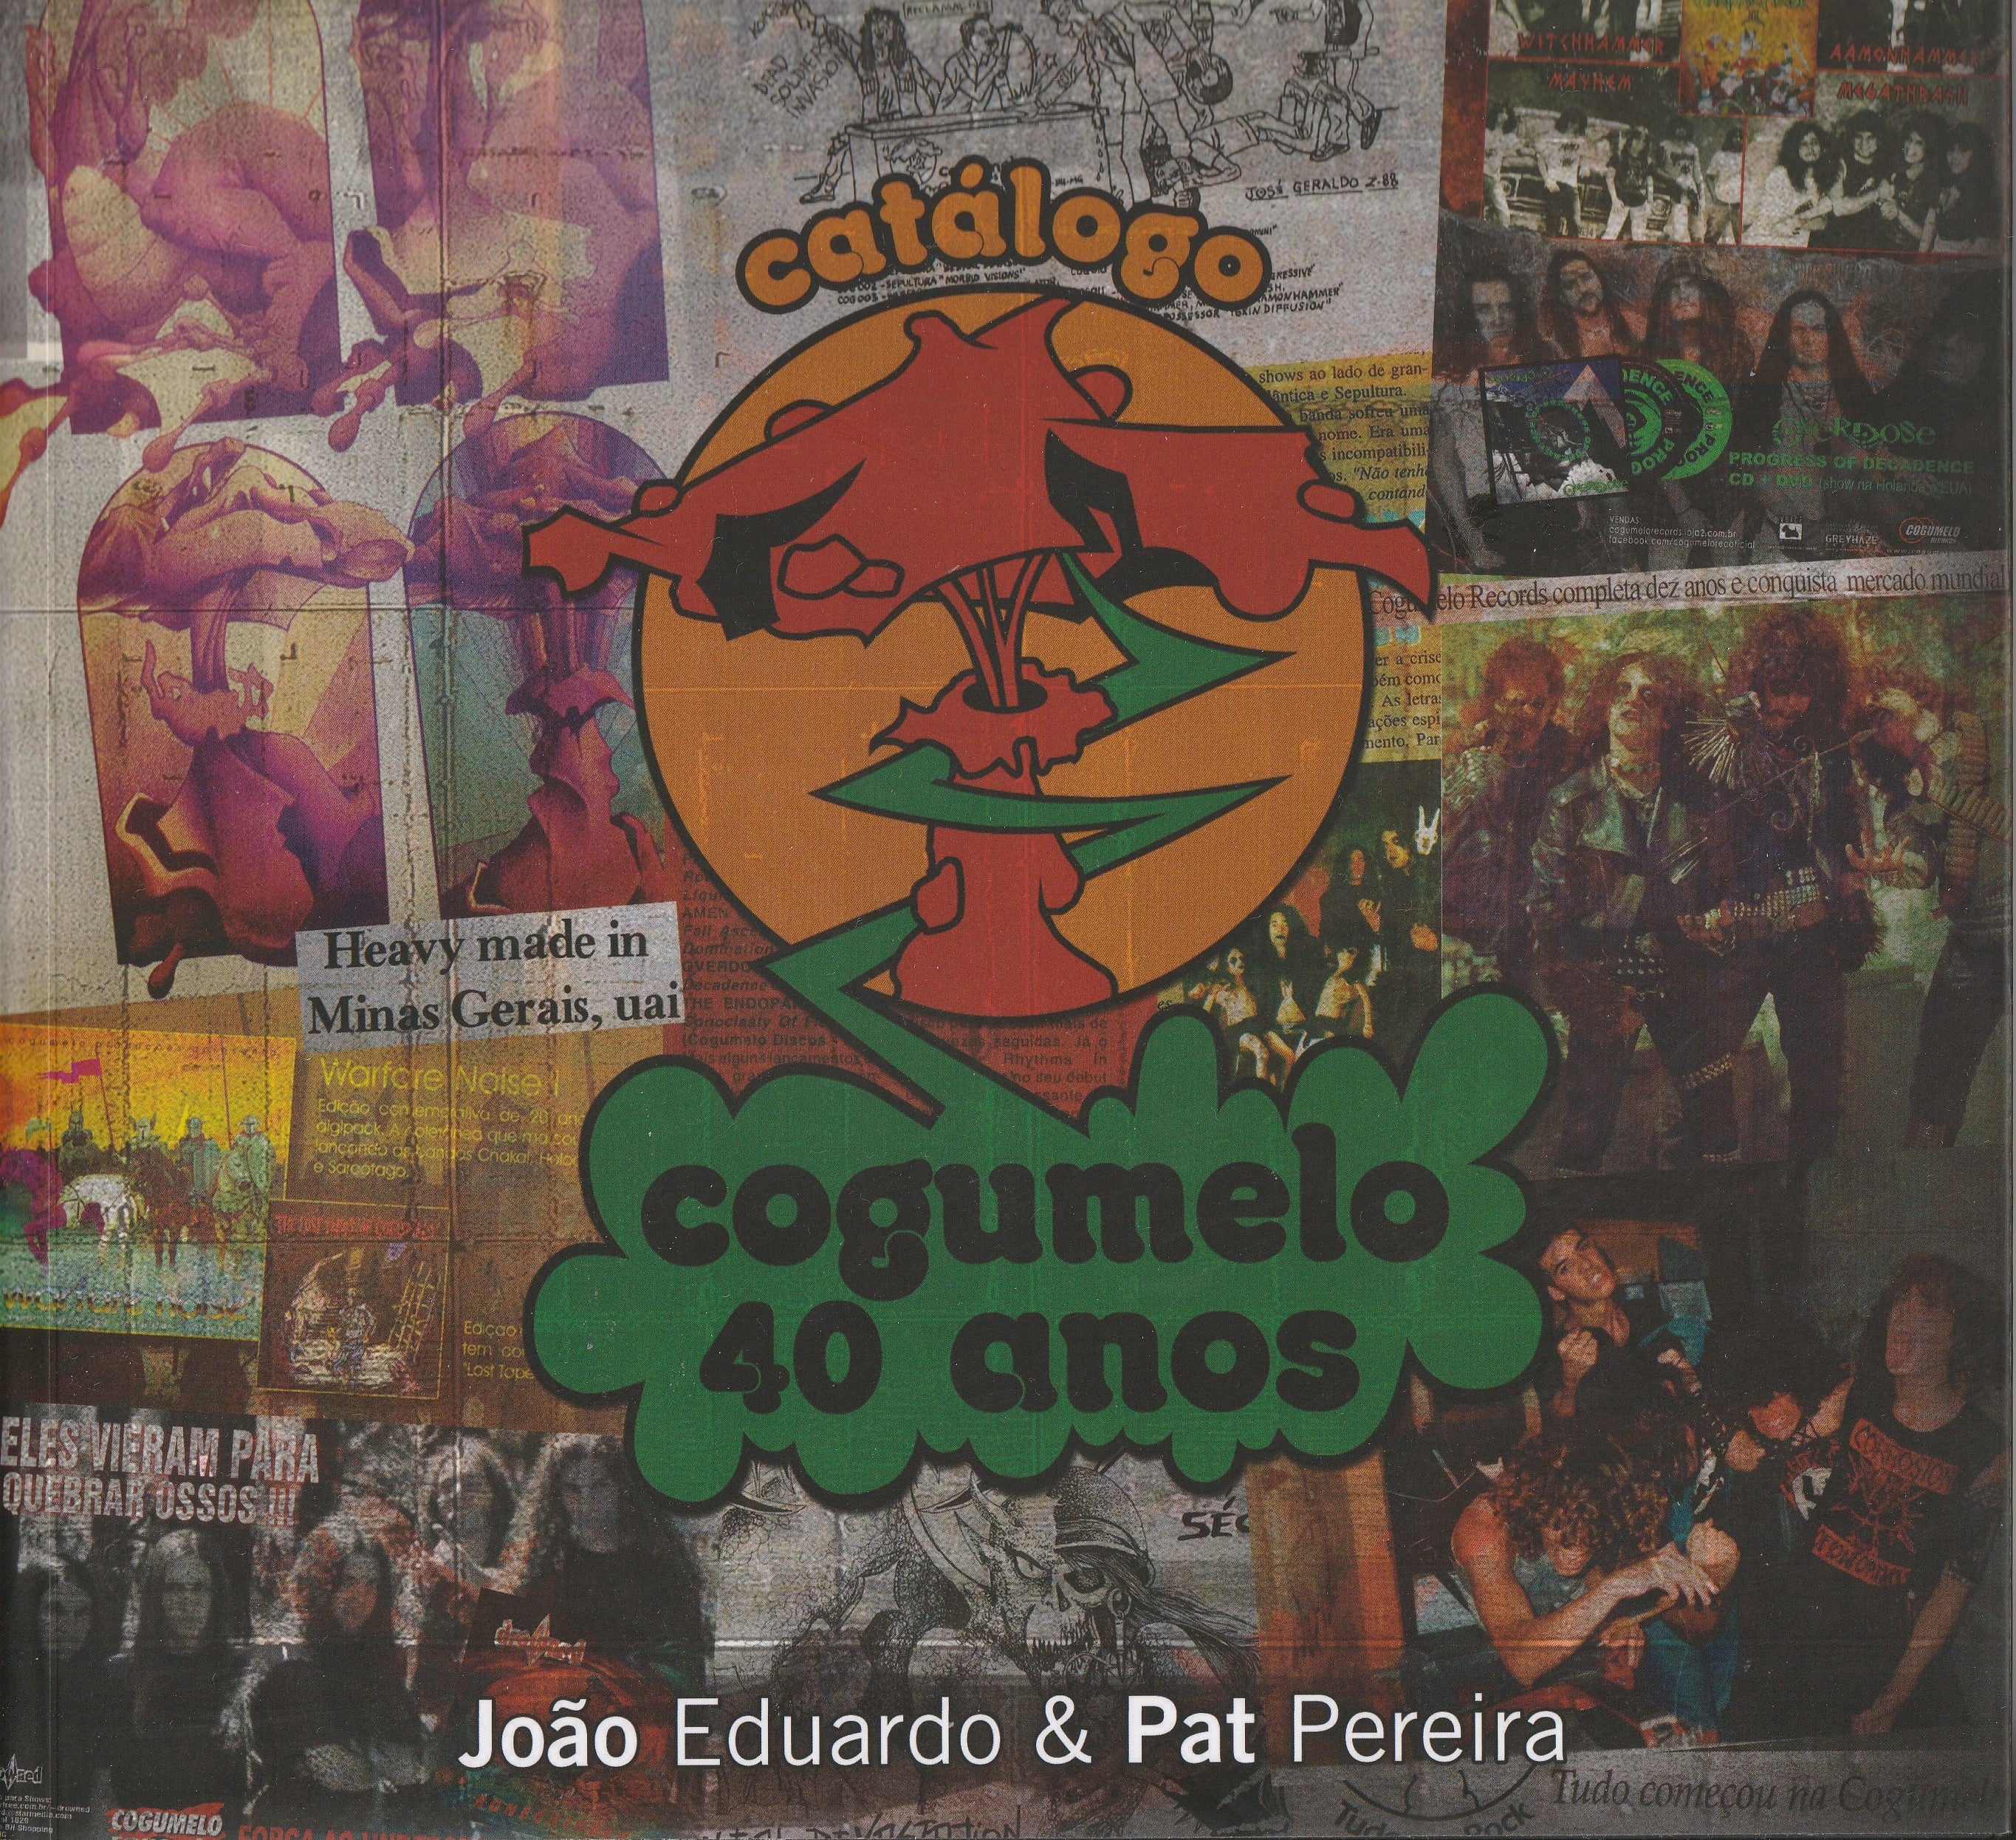 Livestream, 40 Years of Cogumelo Records